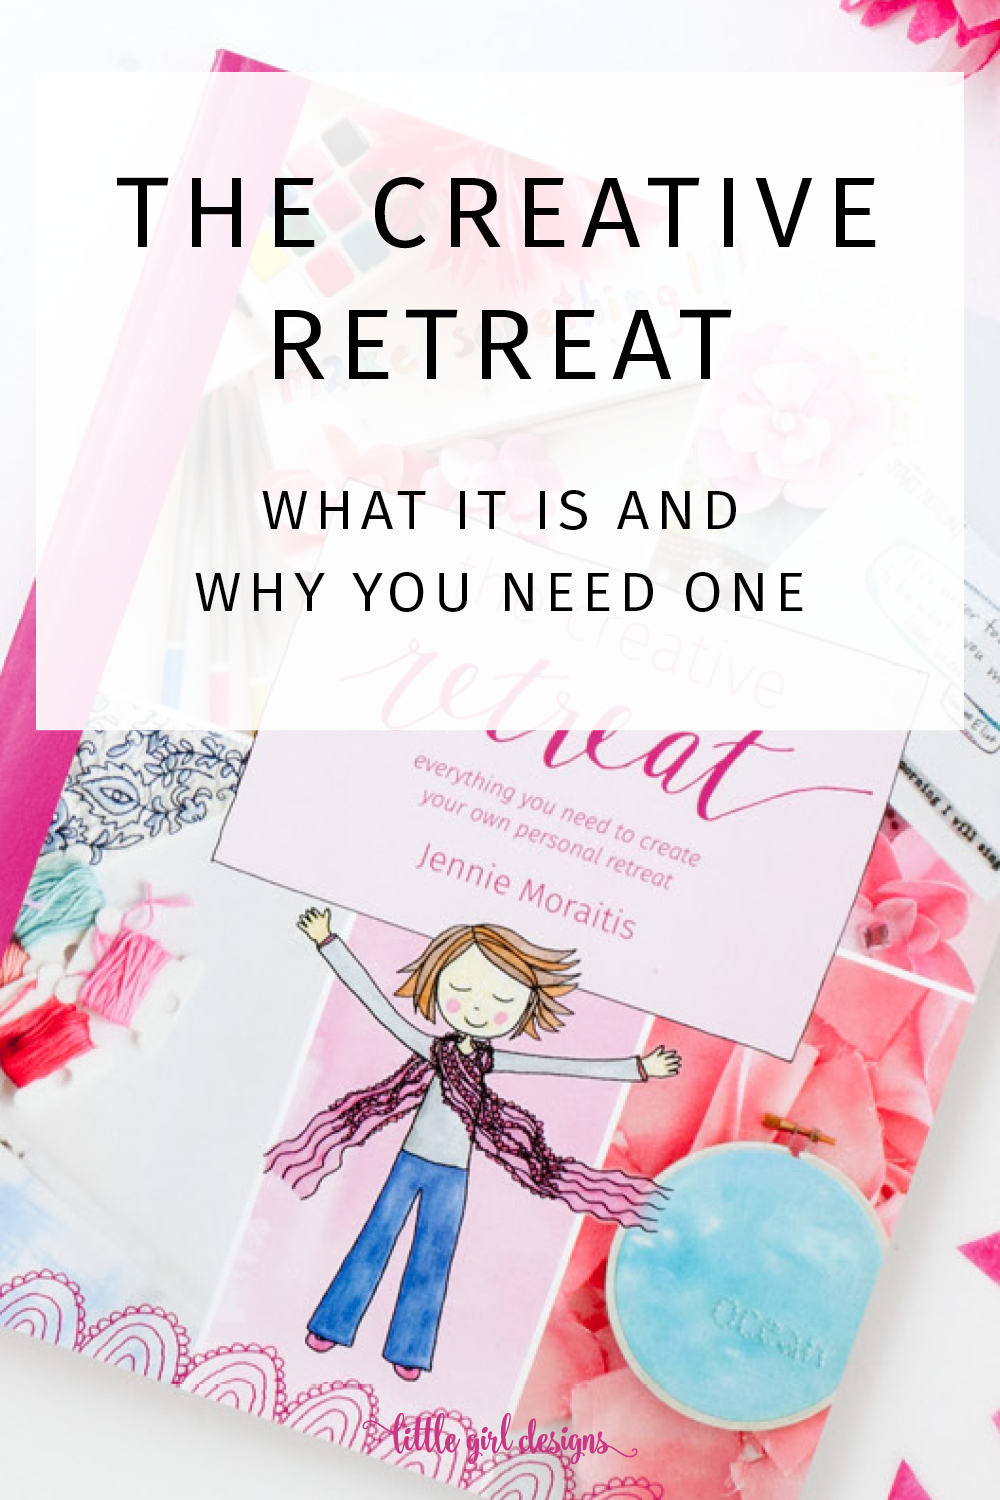 The Creative Retreat - Don’t you wish you could get away and work on your creative projects? I'll show you how to create your own personal retreat with this resource. You're going to love this! @ littlegirldesigns.com